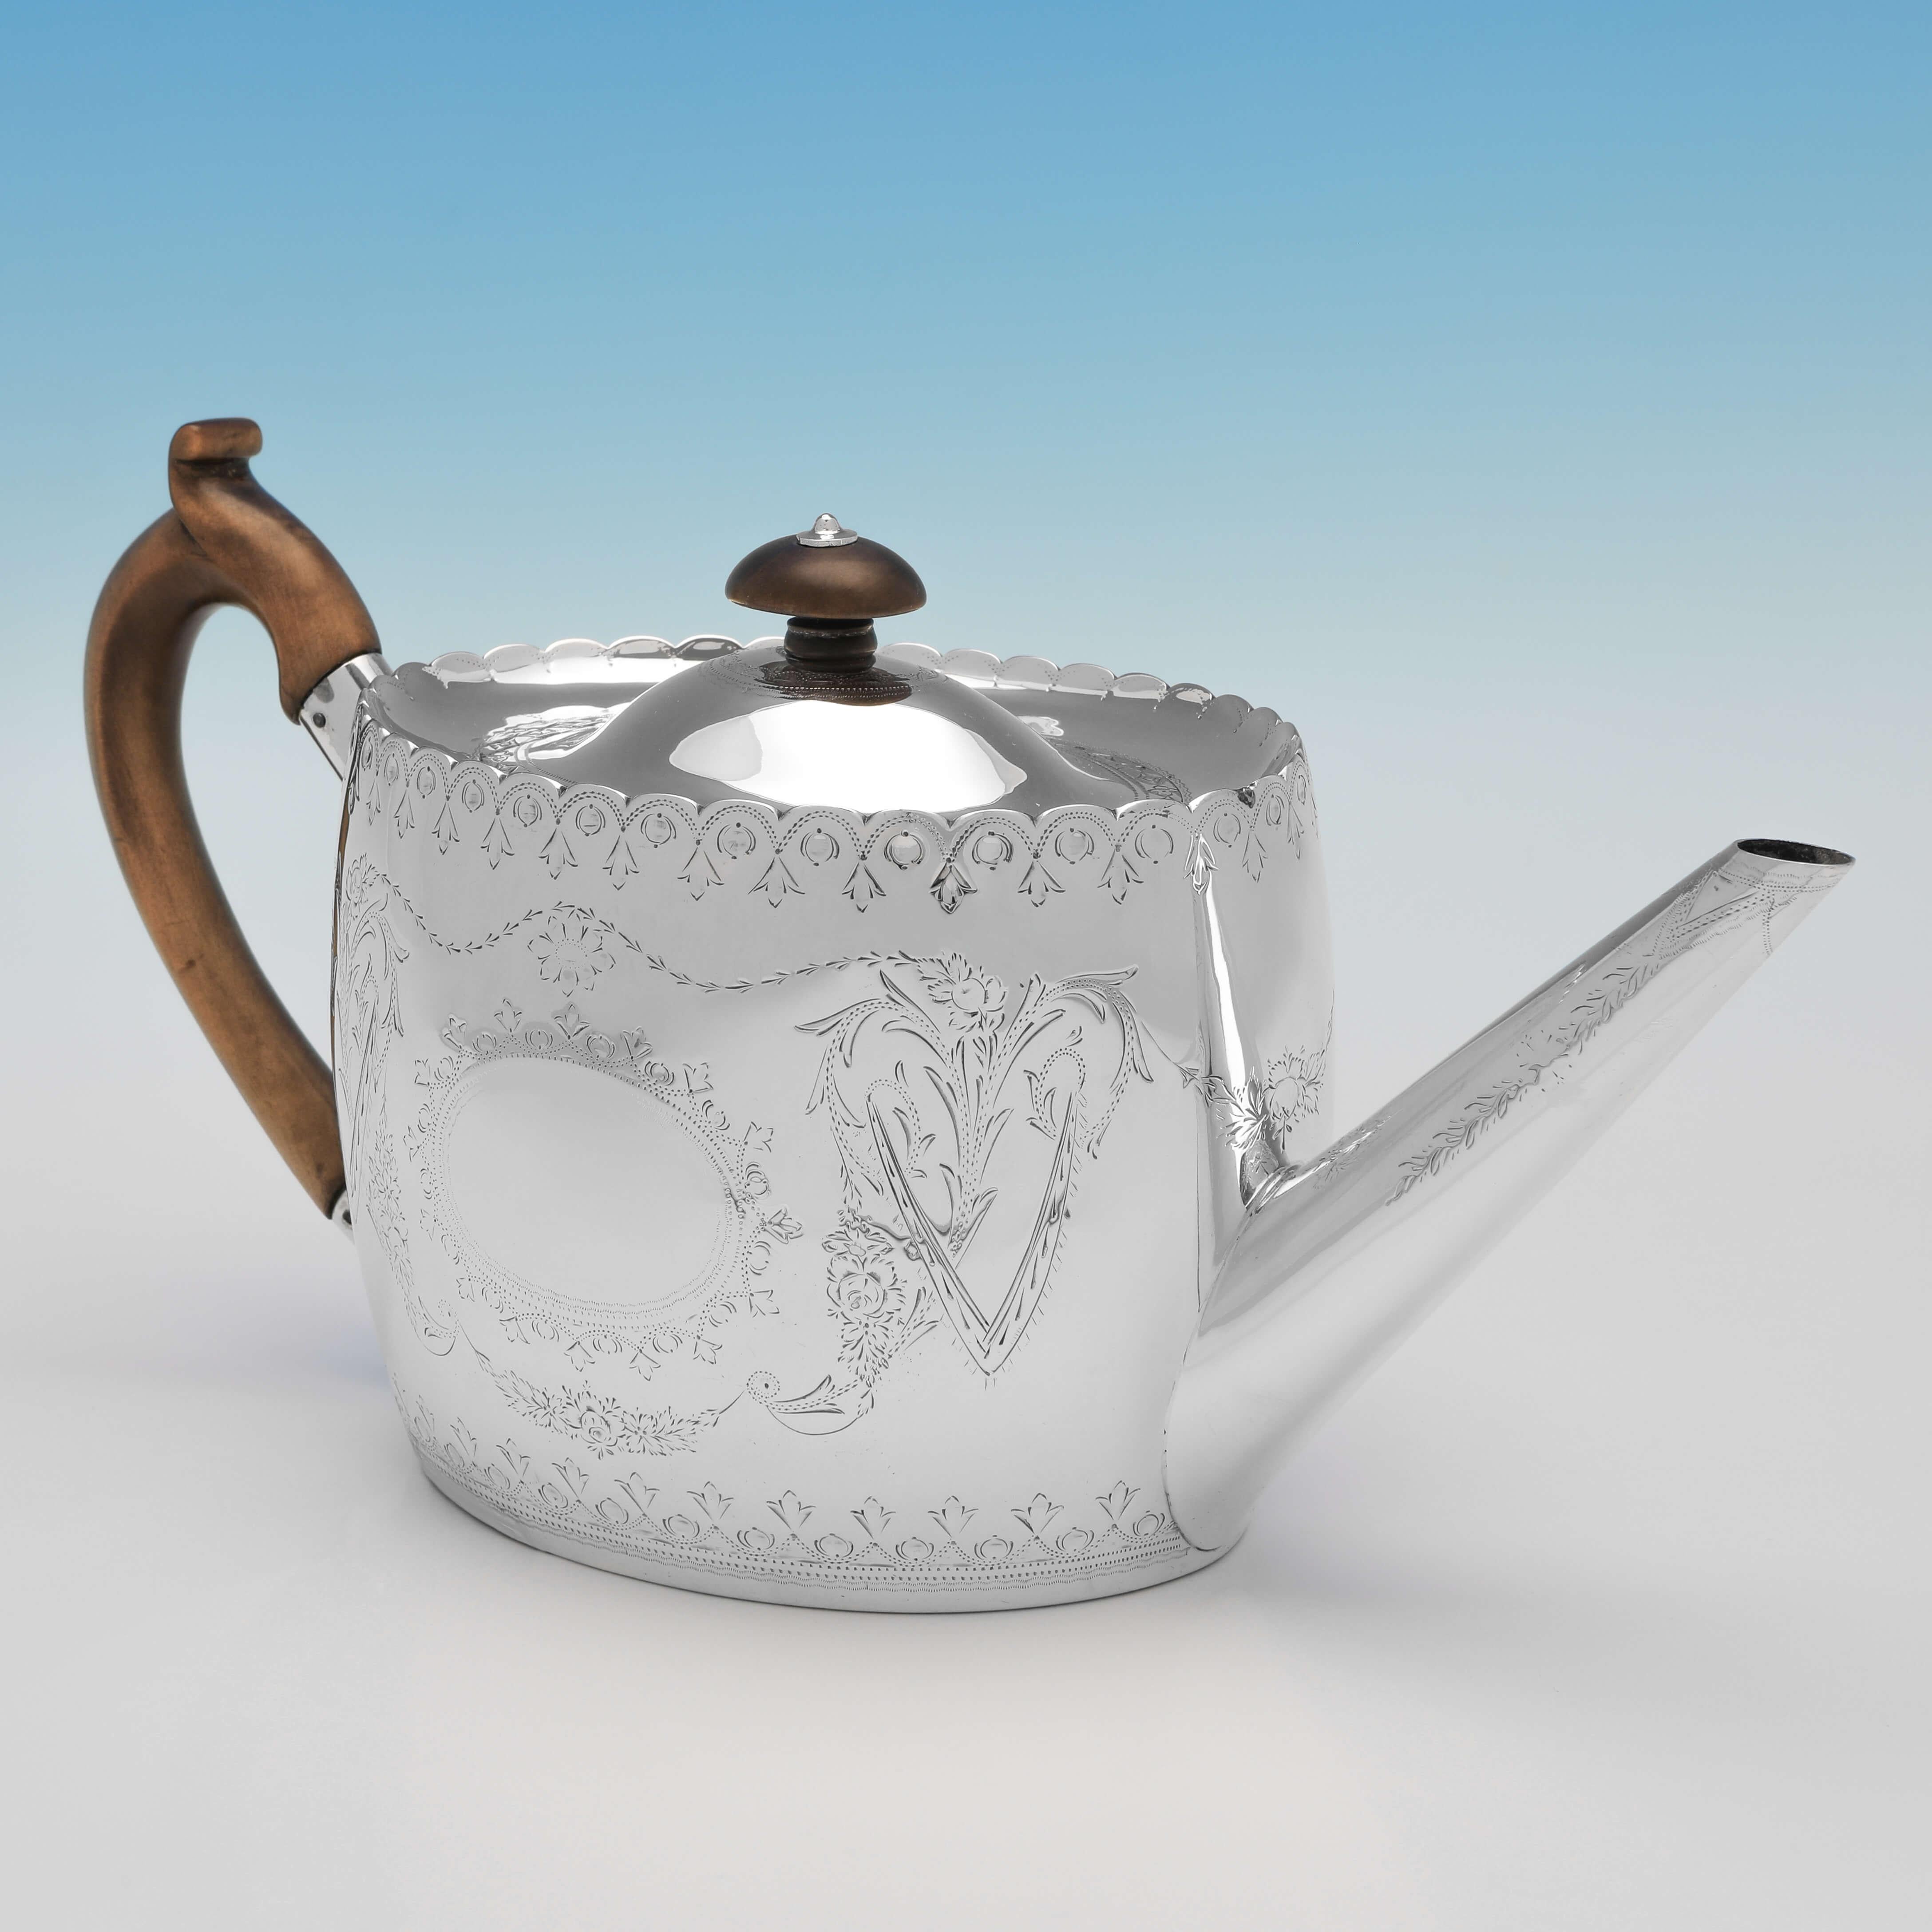 Hallmarked in London in 1881 by Henry William Curry, this attractive, Victorian, Antique sterling silver teapot, features engraved detailing throughout, a wooden handle and finial, and a shaped rim. The teapot measures 5.75